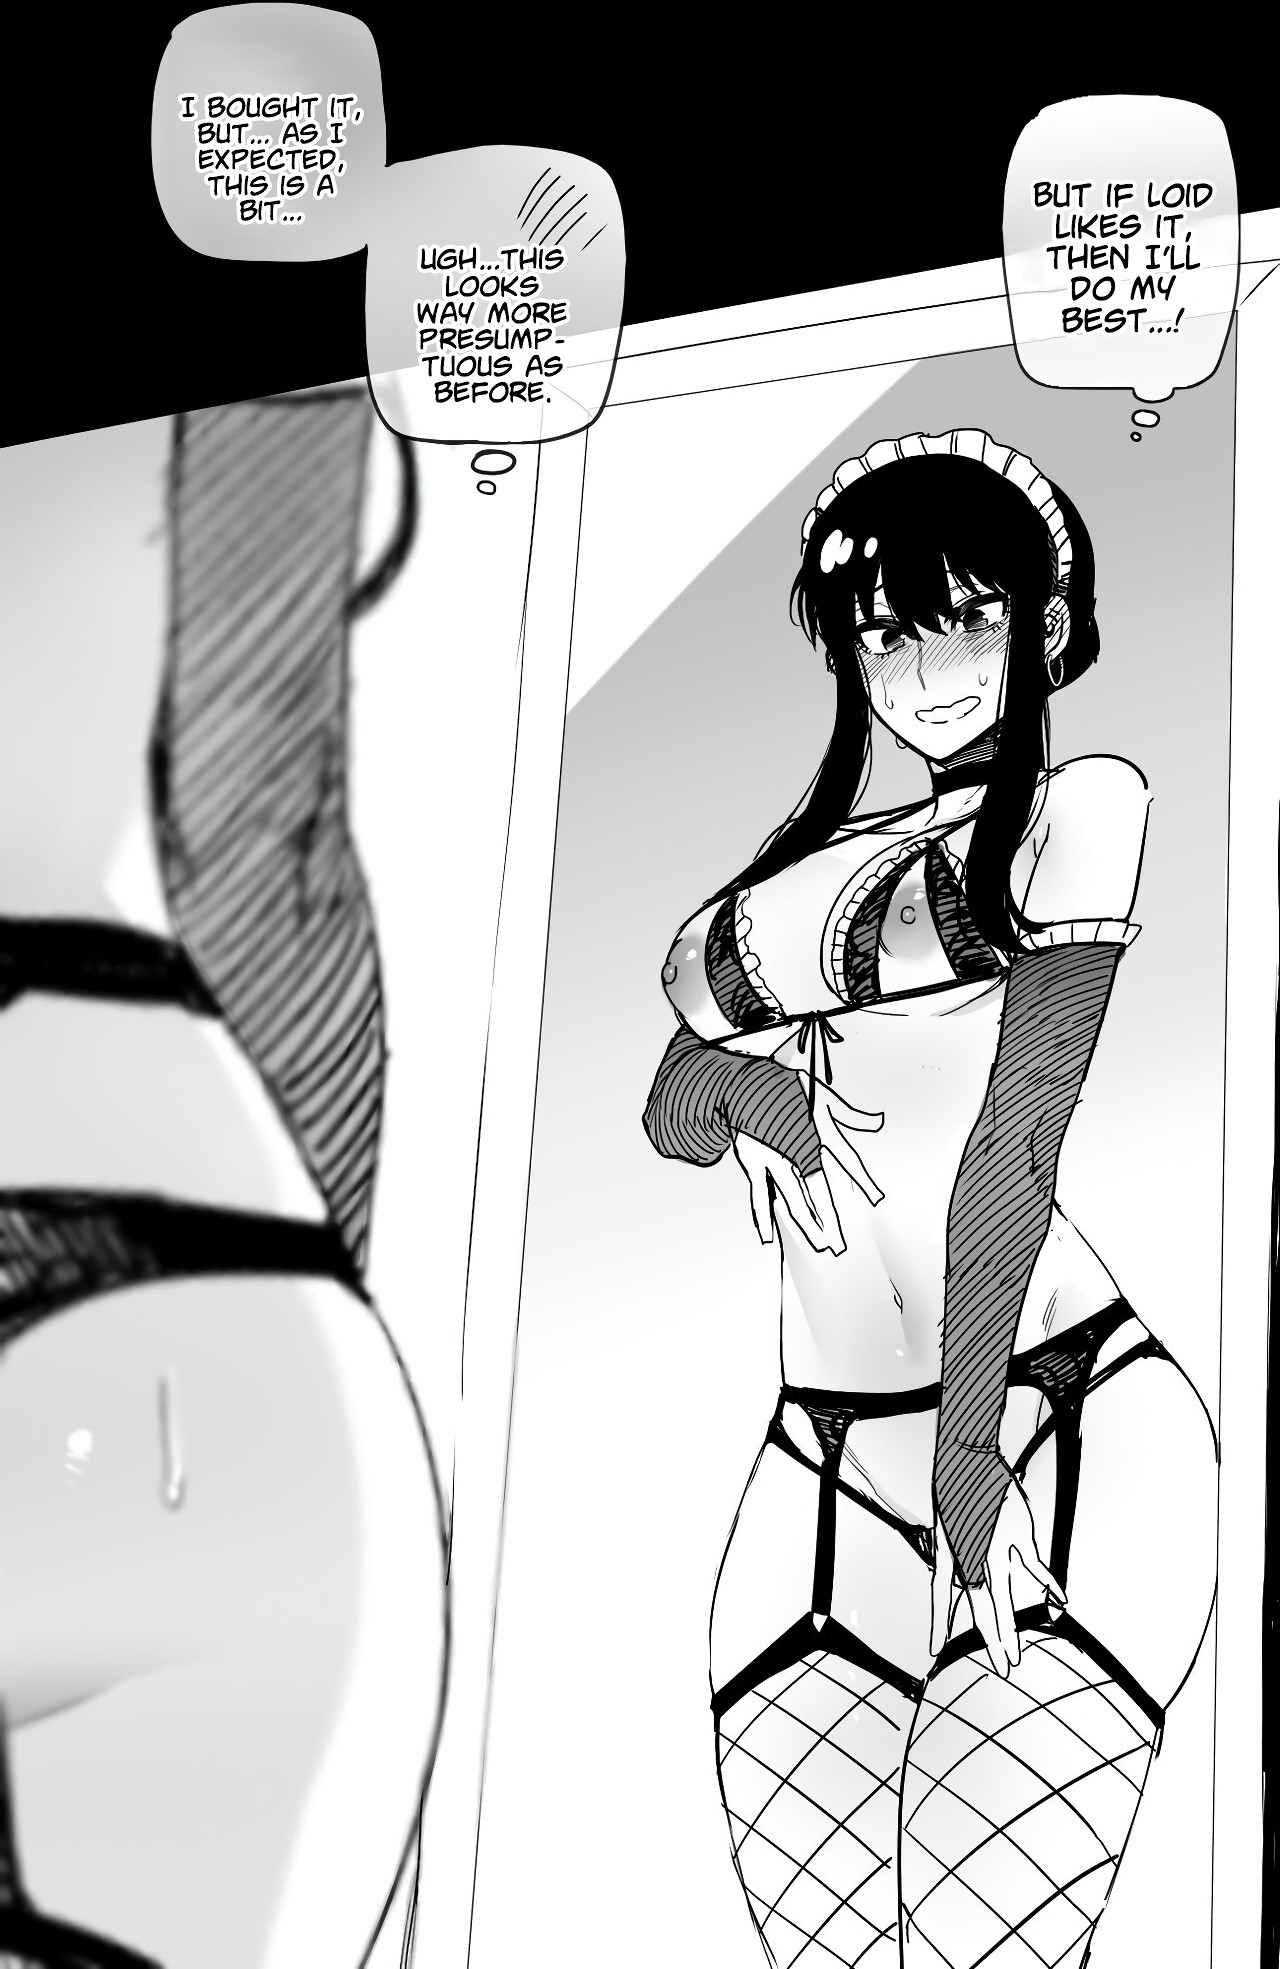 Spy x Sex - After Story hentai manga picture 6